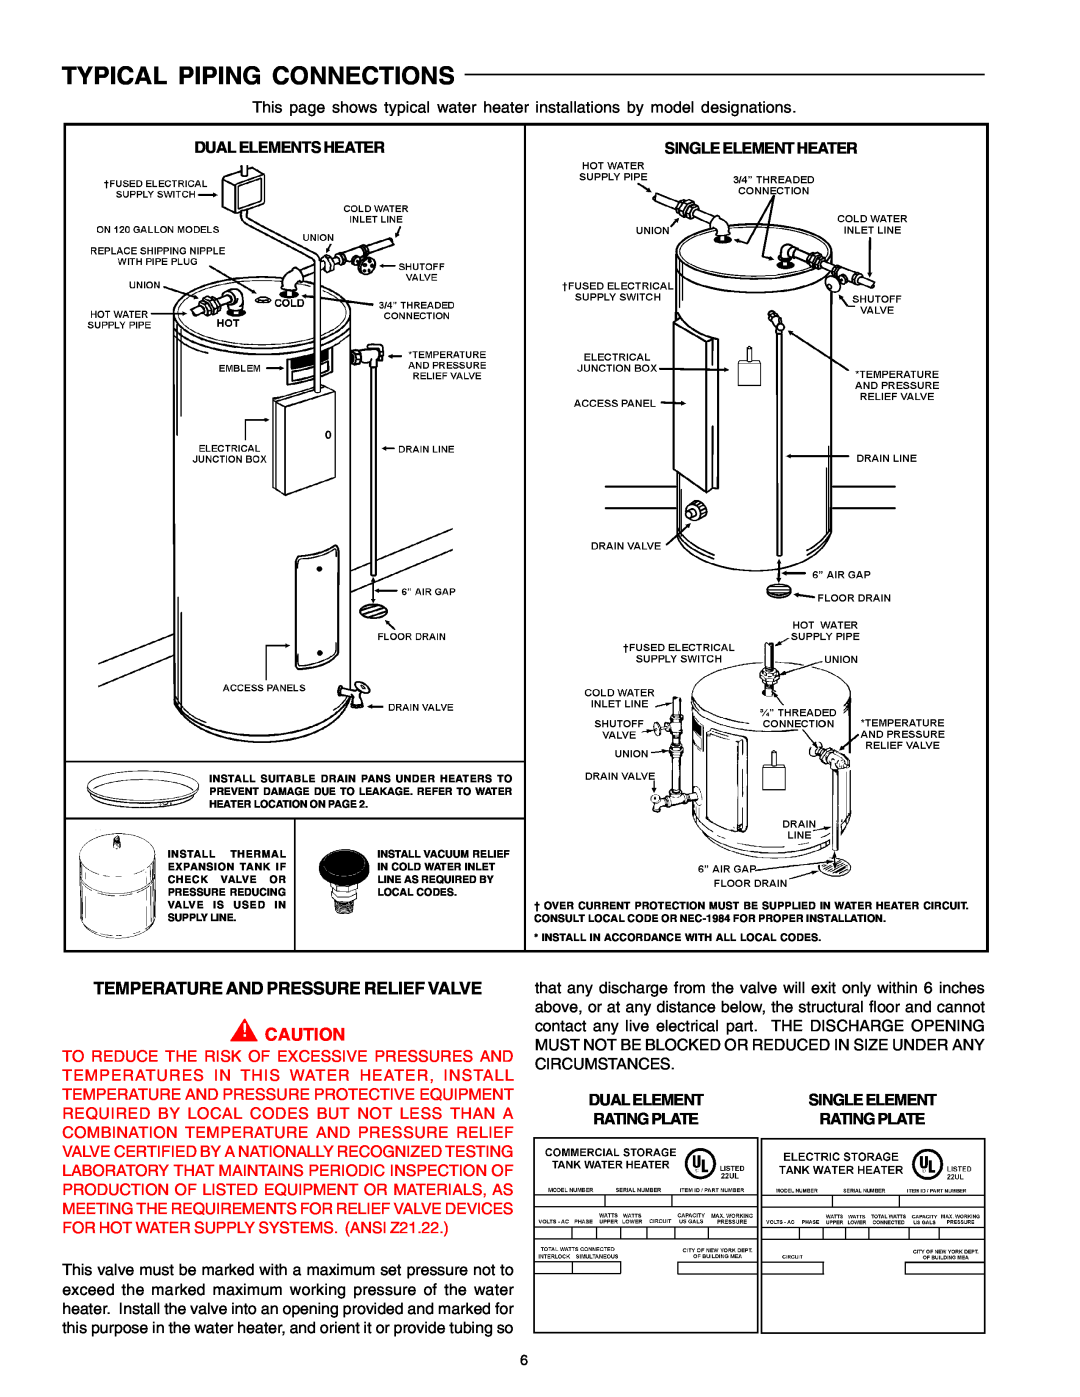 A.O. Smith DEN, DEL warranty Typical Piping Connections, Temperature And Pressure Relief Valve, Dual Elements Heater 